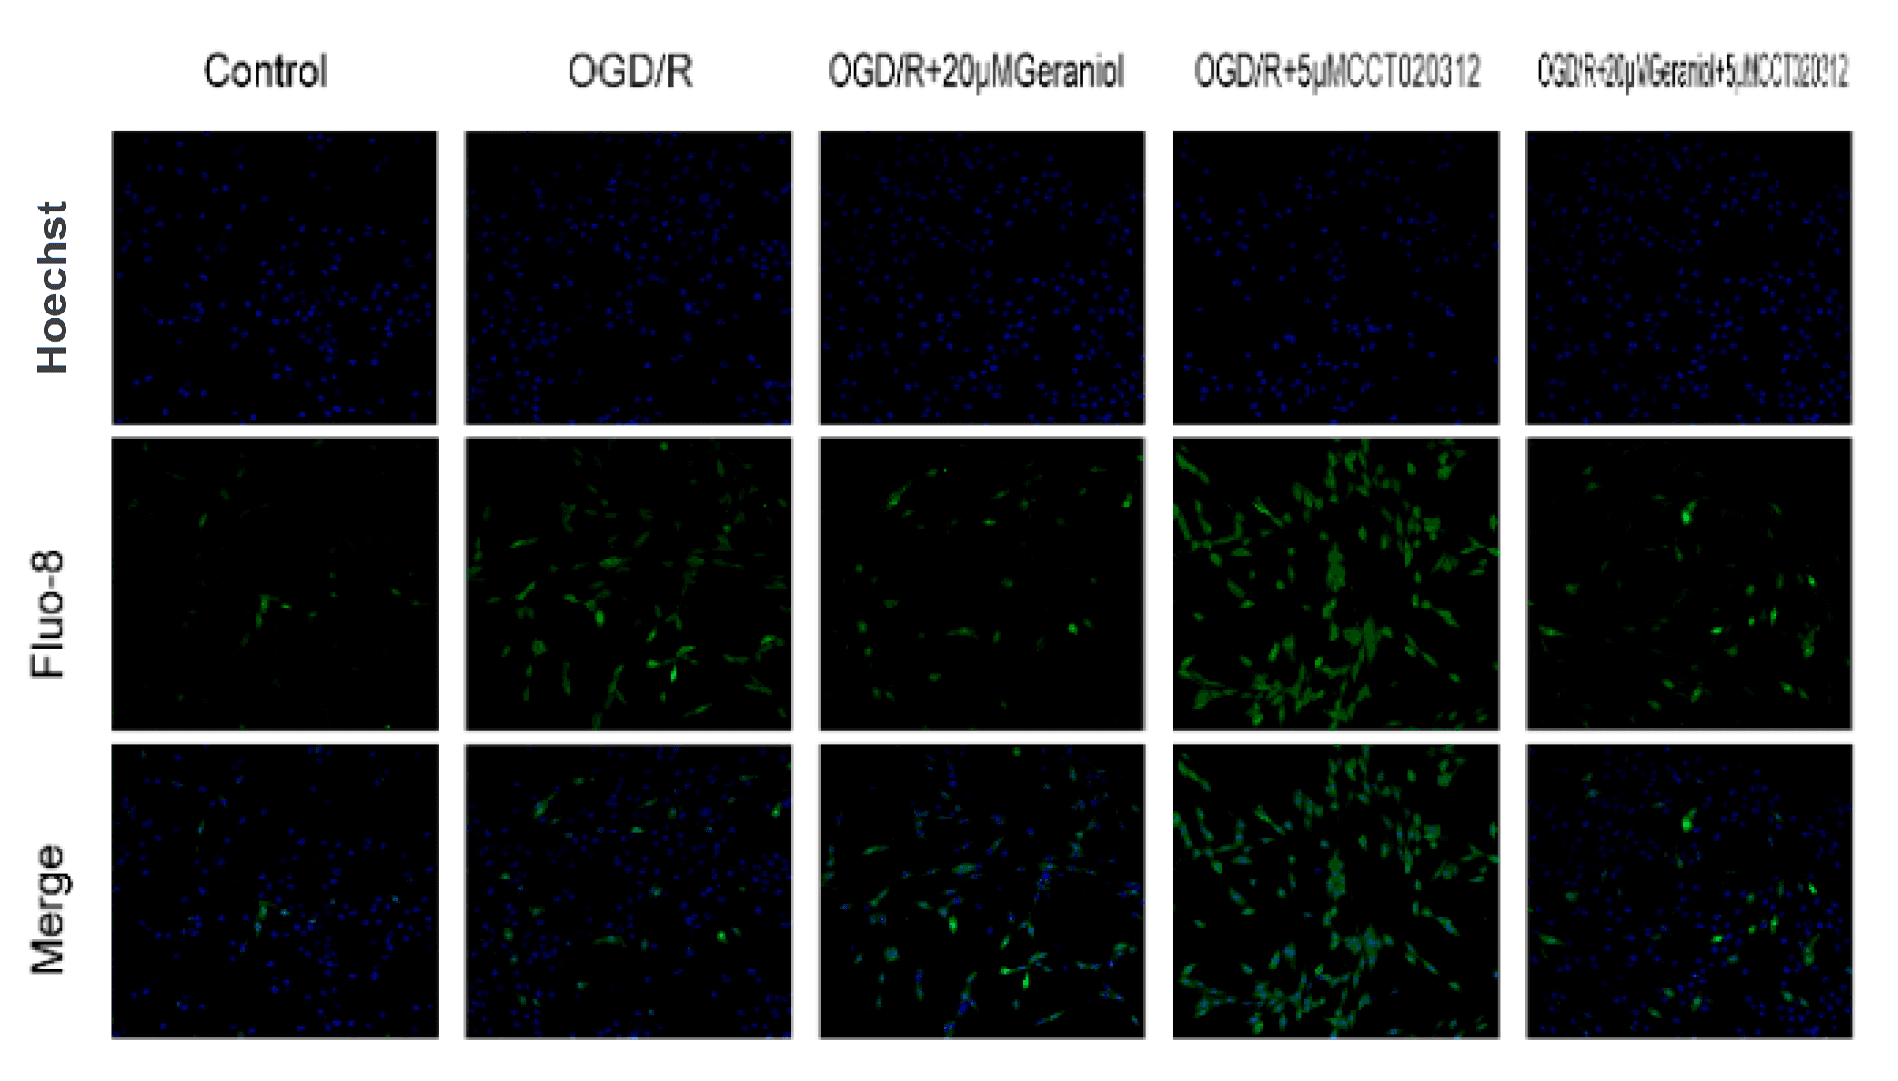 Inhibition of endoplasmic reticulum stress via the PERK-ATF4-CHOP pathway is required for the geraniol-mediated protective effect against oxygen–glucose deprivation/reoxygenation (OGD/R) injury in PC12 cells. The intracellular calcium ion concentration was detected via Fluo-8/AM staining using laser confocal microscopy. Bar = 200 μm. Source: <b>Geraniol-Mediated Suppression of Endoplasmic Reticulum Stress Protects against Cerebral Ischemia–Reperfusion Injury via the PERK-ATF4-CHOP Pathway</b>. by Wu, Y.; Fan, X.; Chen, S.; Deng, L.; Jiang, L.; Yang, S.; Dong, Z. <em>Int. J. Mol. Sci</em>. Dec. 2023.